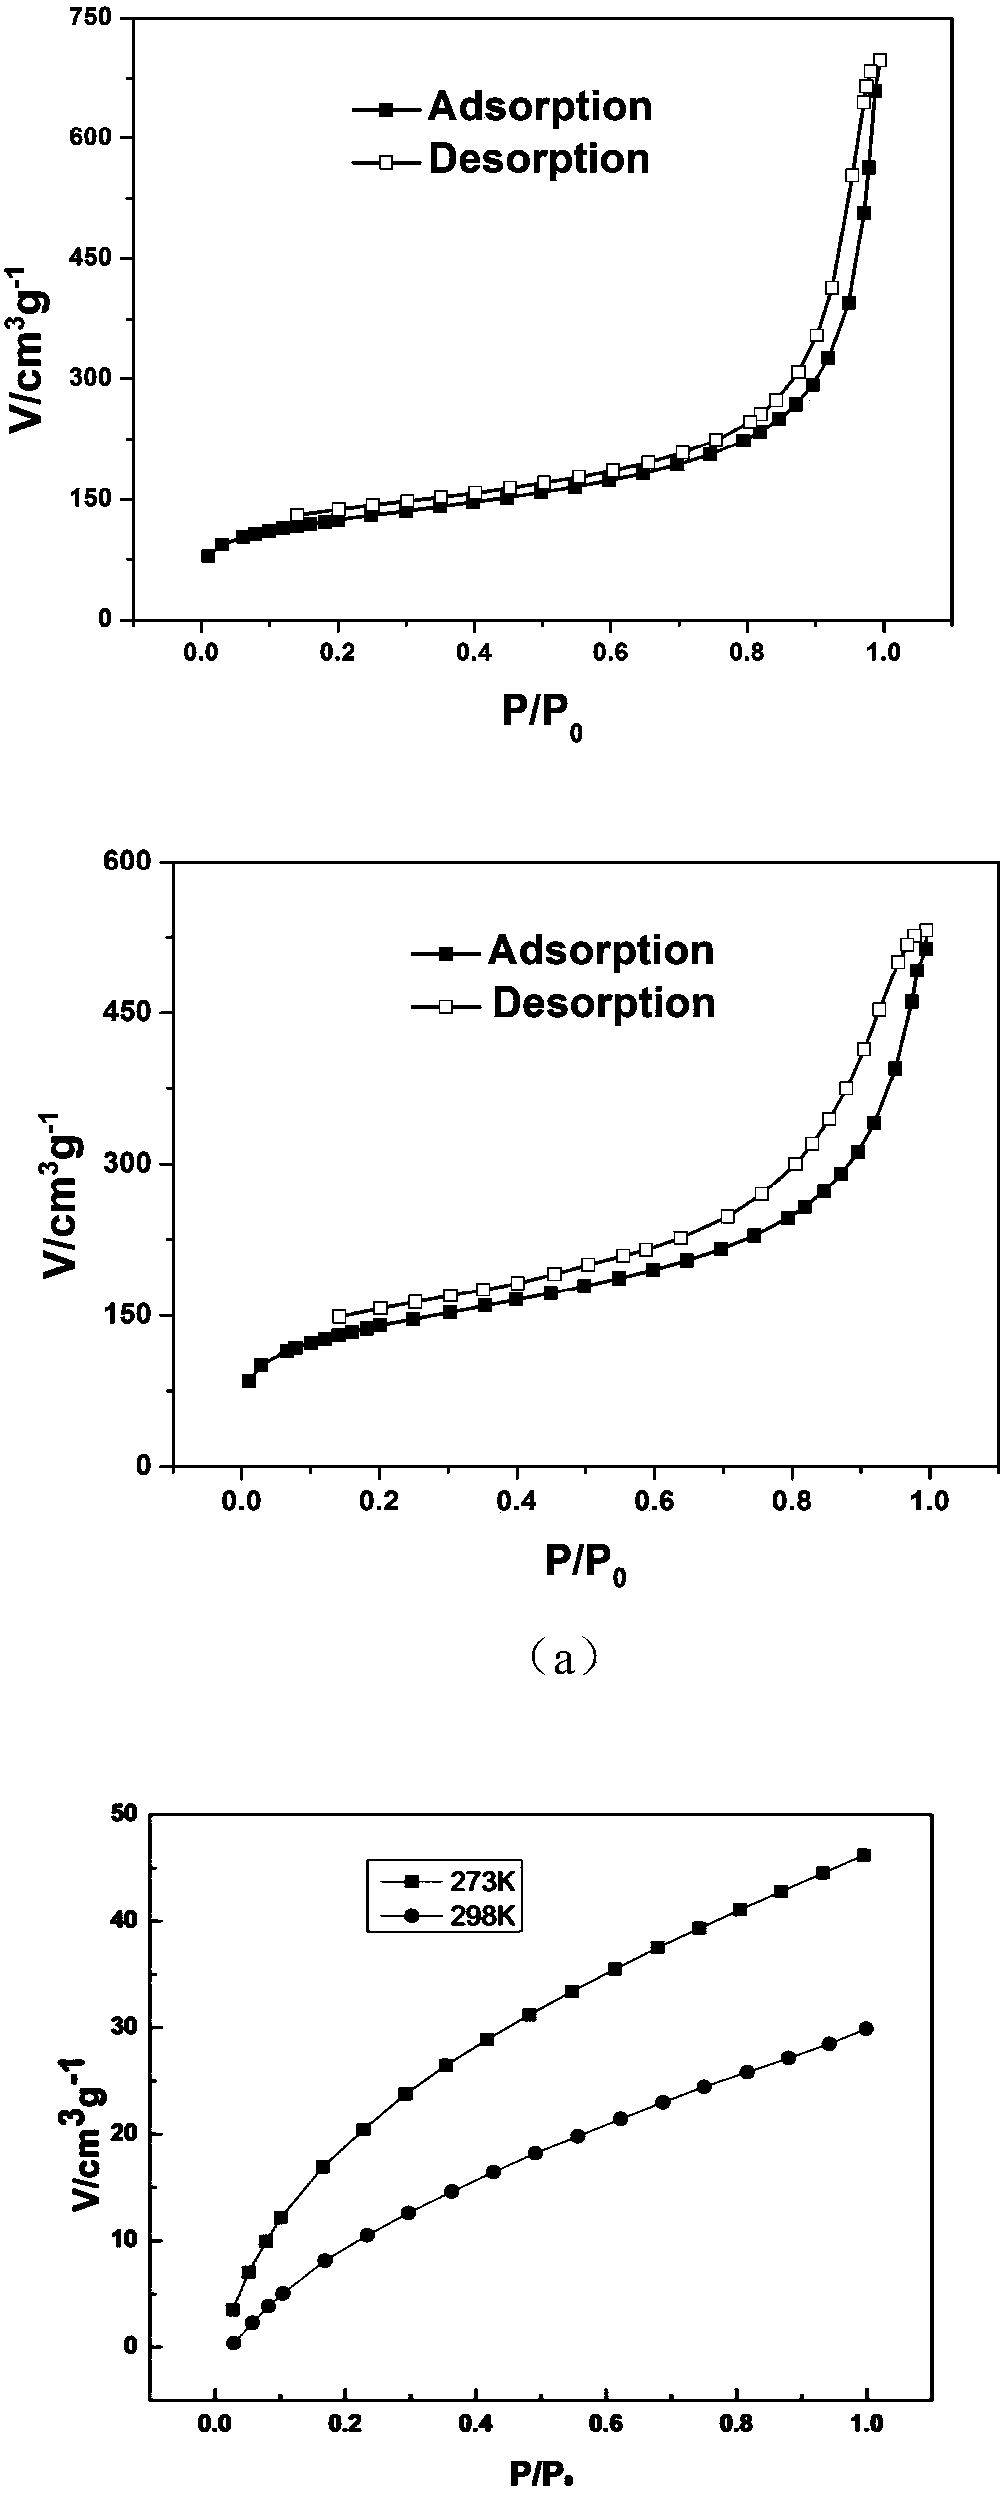 Porous polymer adsorption material containing triazine ring and azo bond functional groups, and porous polymer catalysis material, and preparation methods and applications thereof